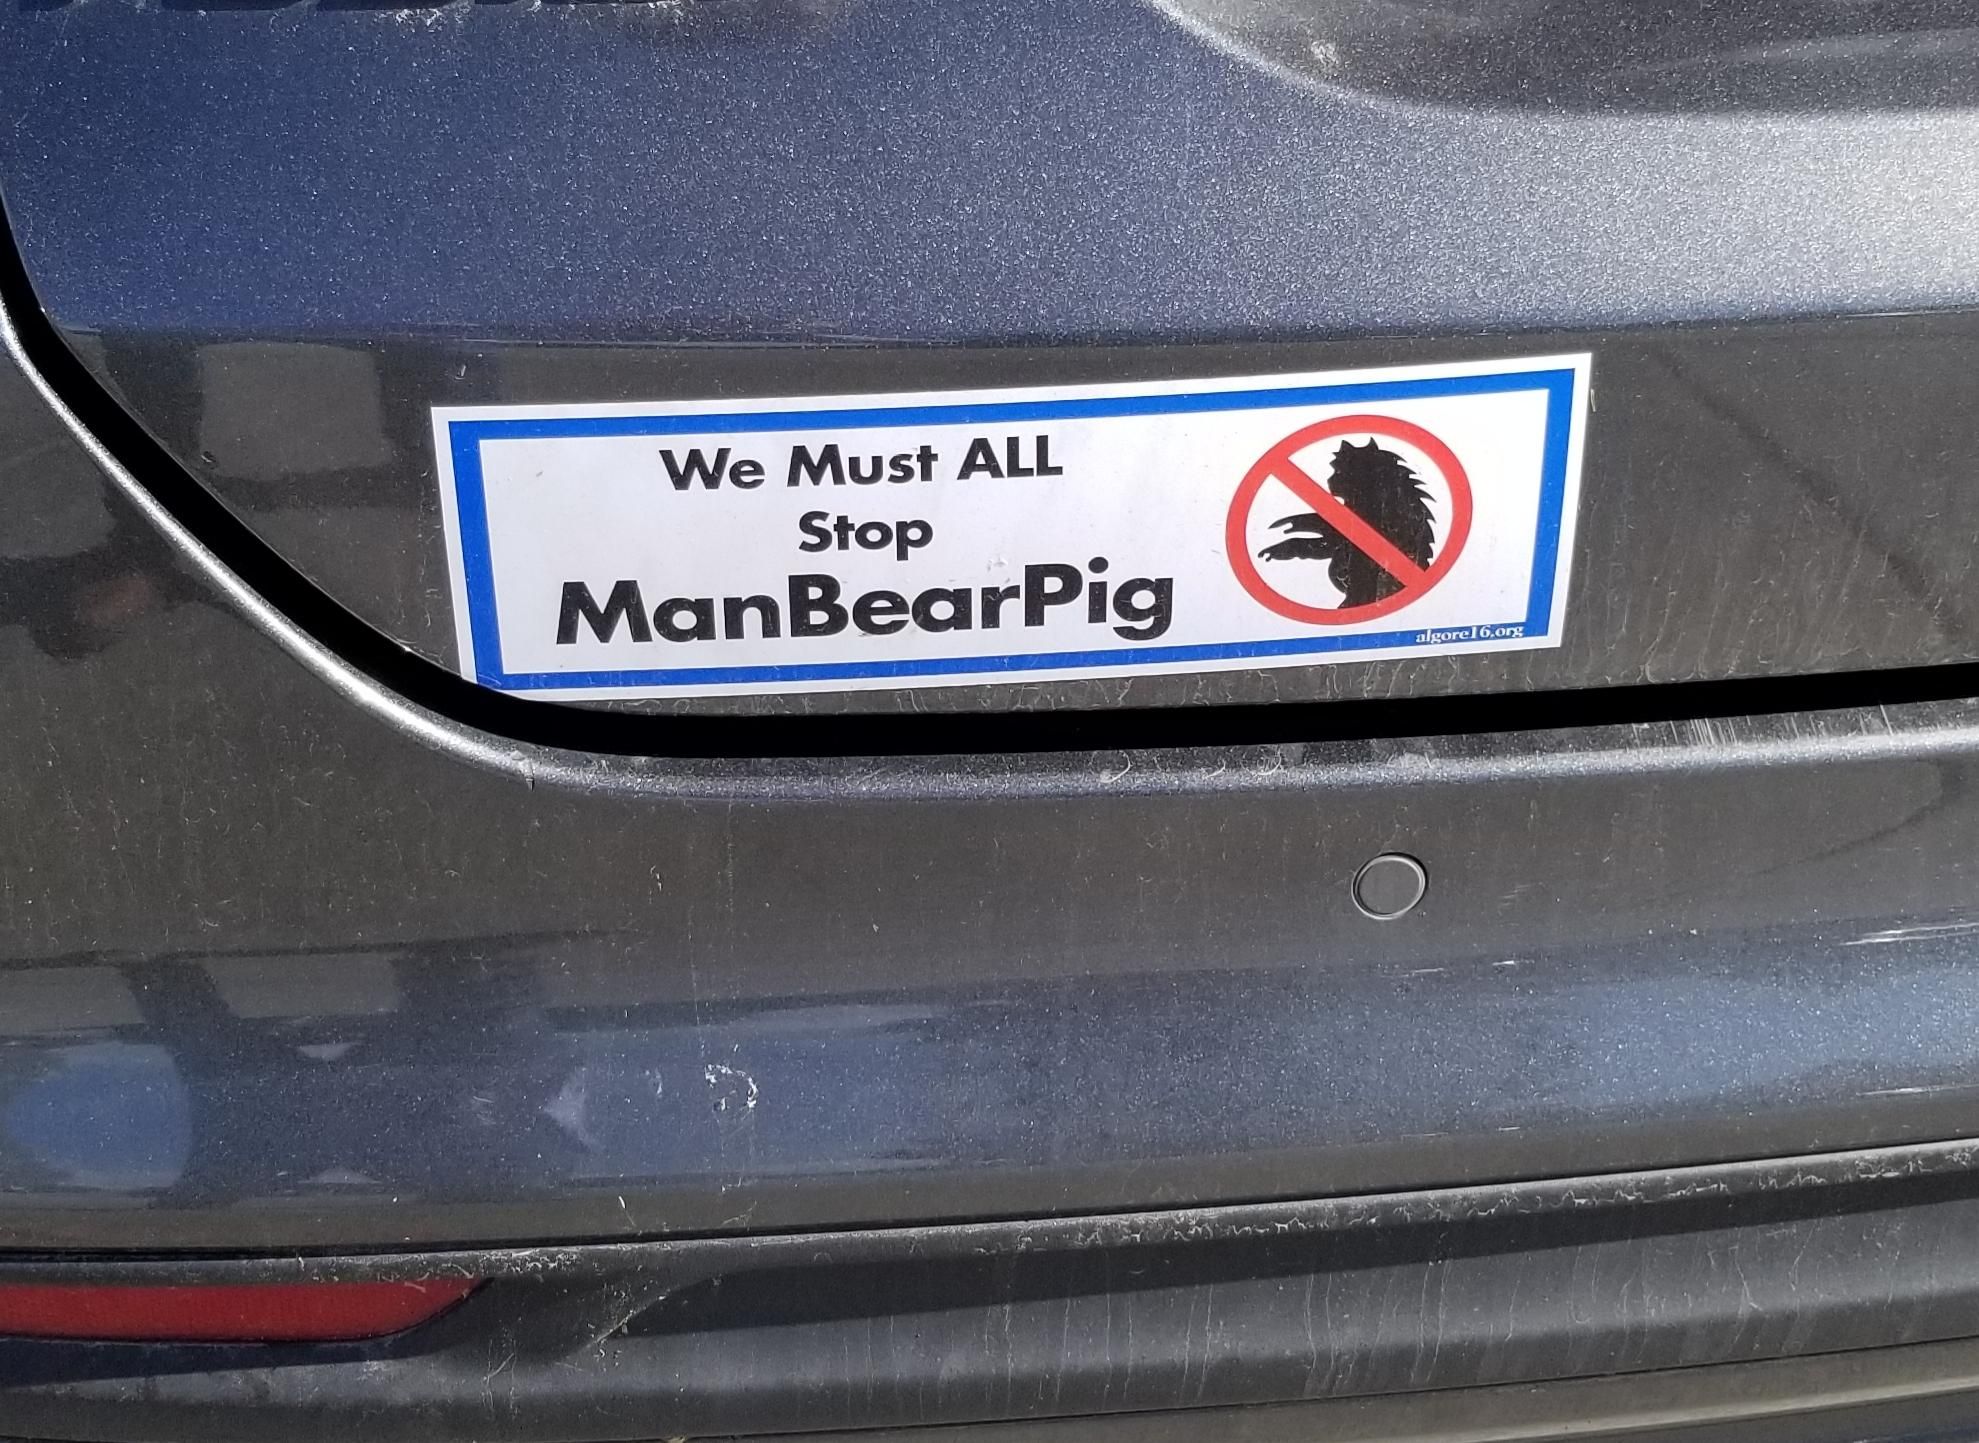 Spotted this sticker today. I'm super serial, guys!